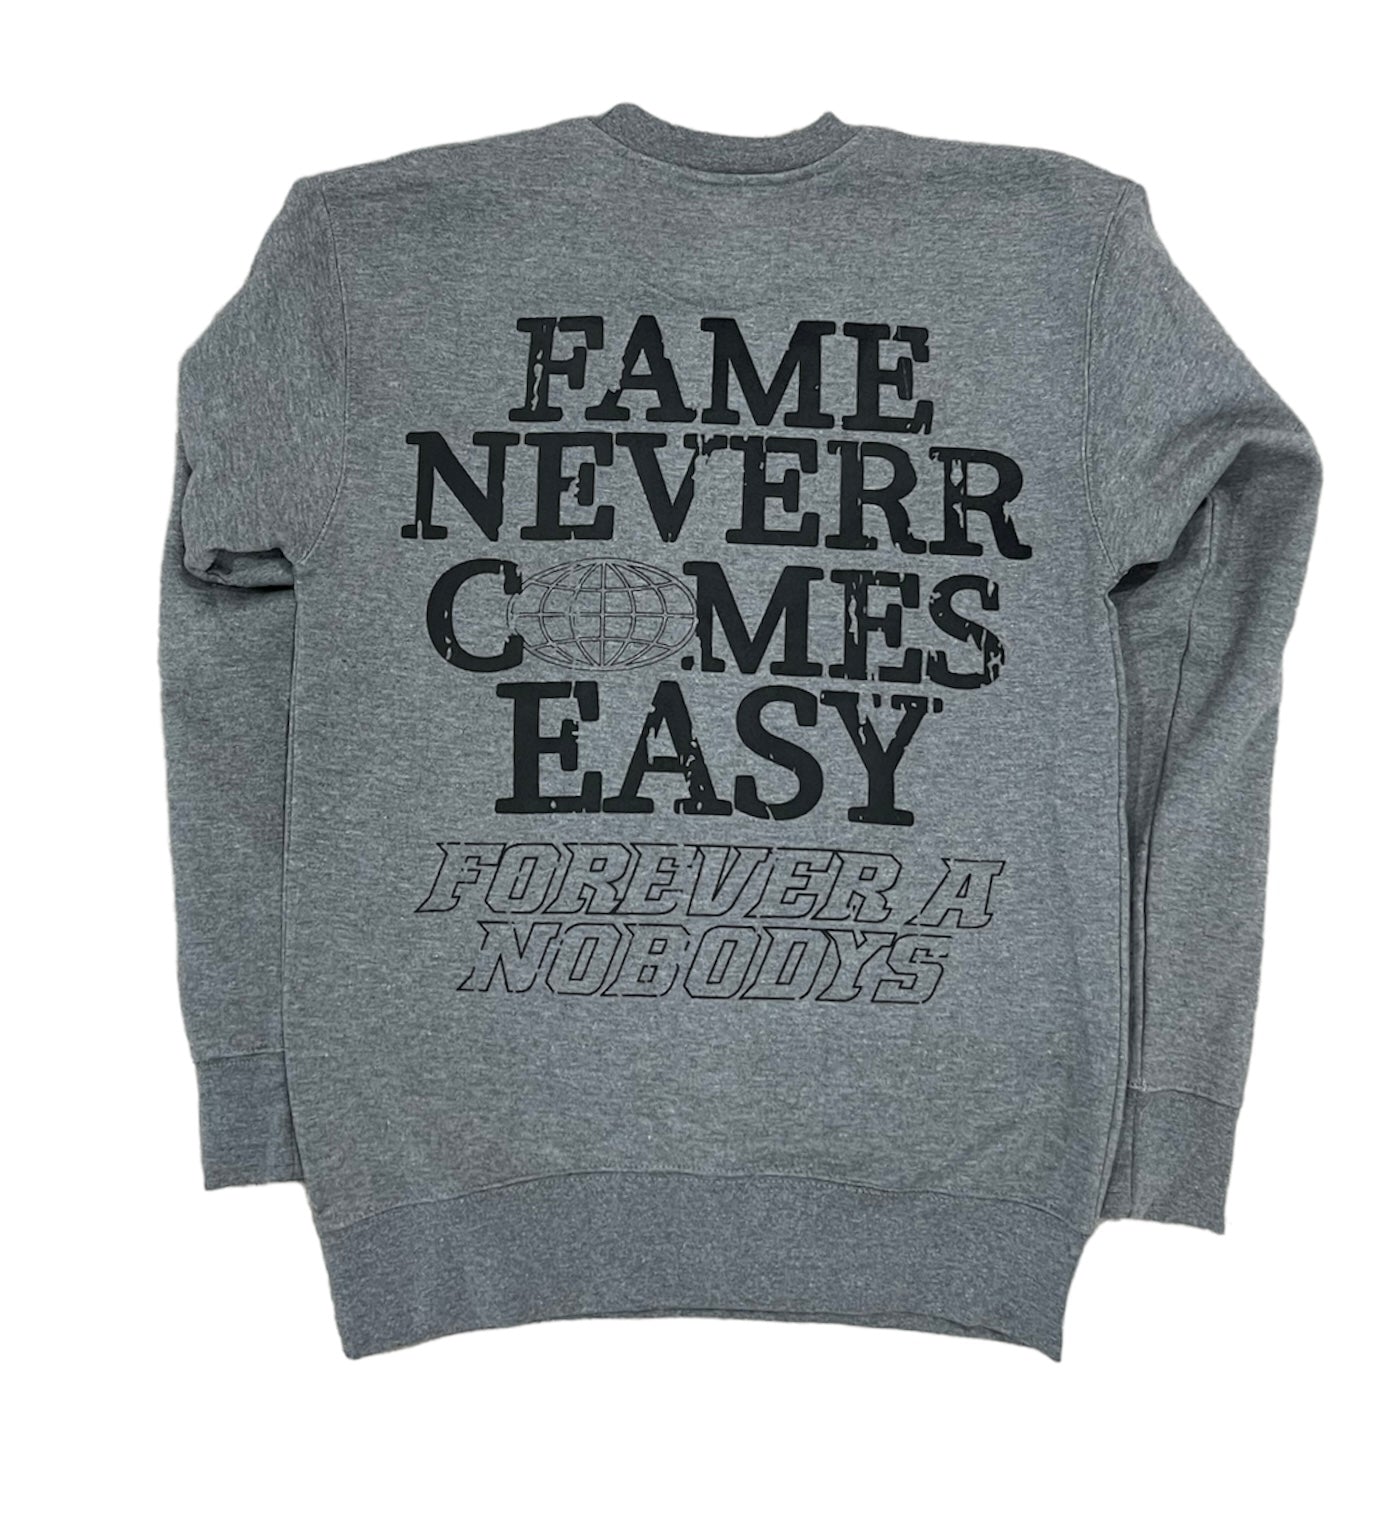 FAME NEVER COMES EASY CREW